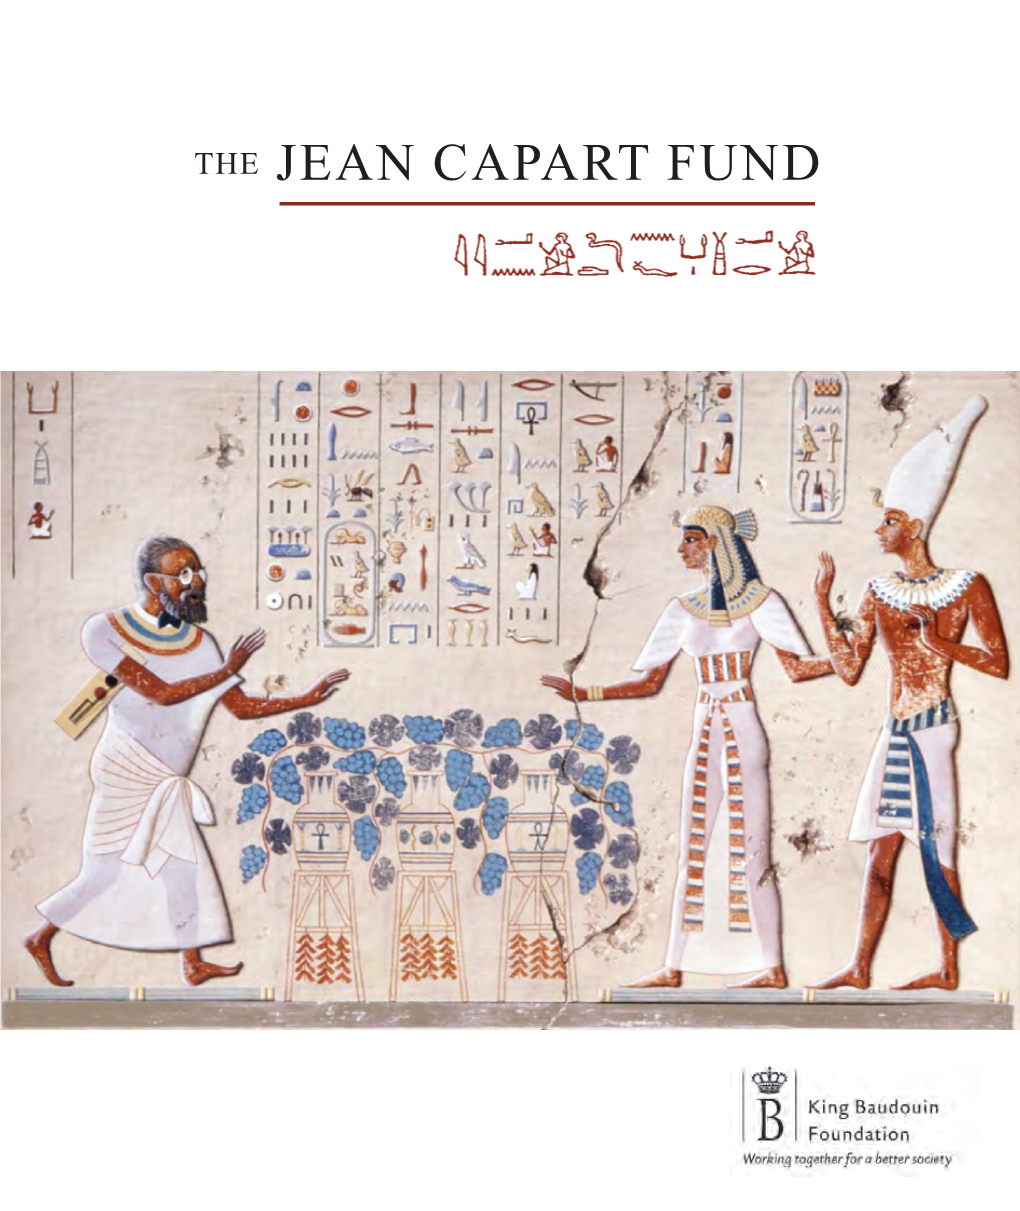 THE JEAN CAPART FUND Cover : Homage by Mark Severin to Jean Capart, 1941 (Royal Museums of Art and History, Brussels)